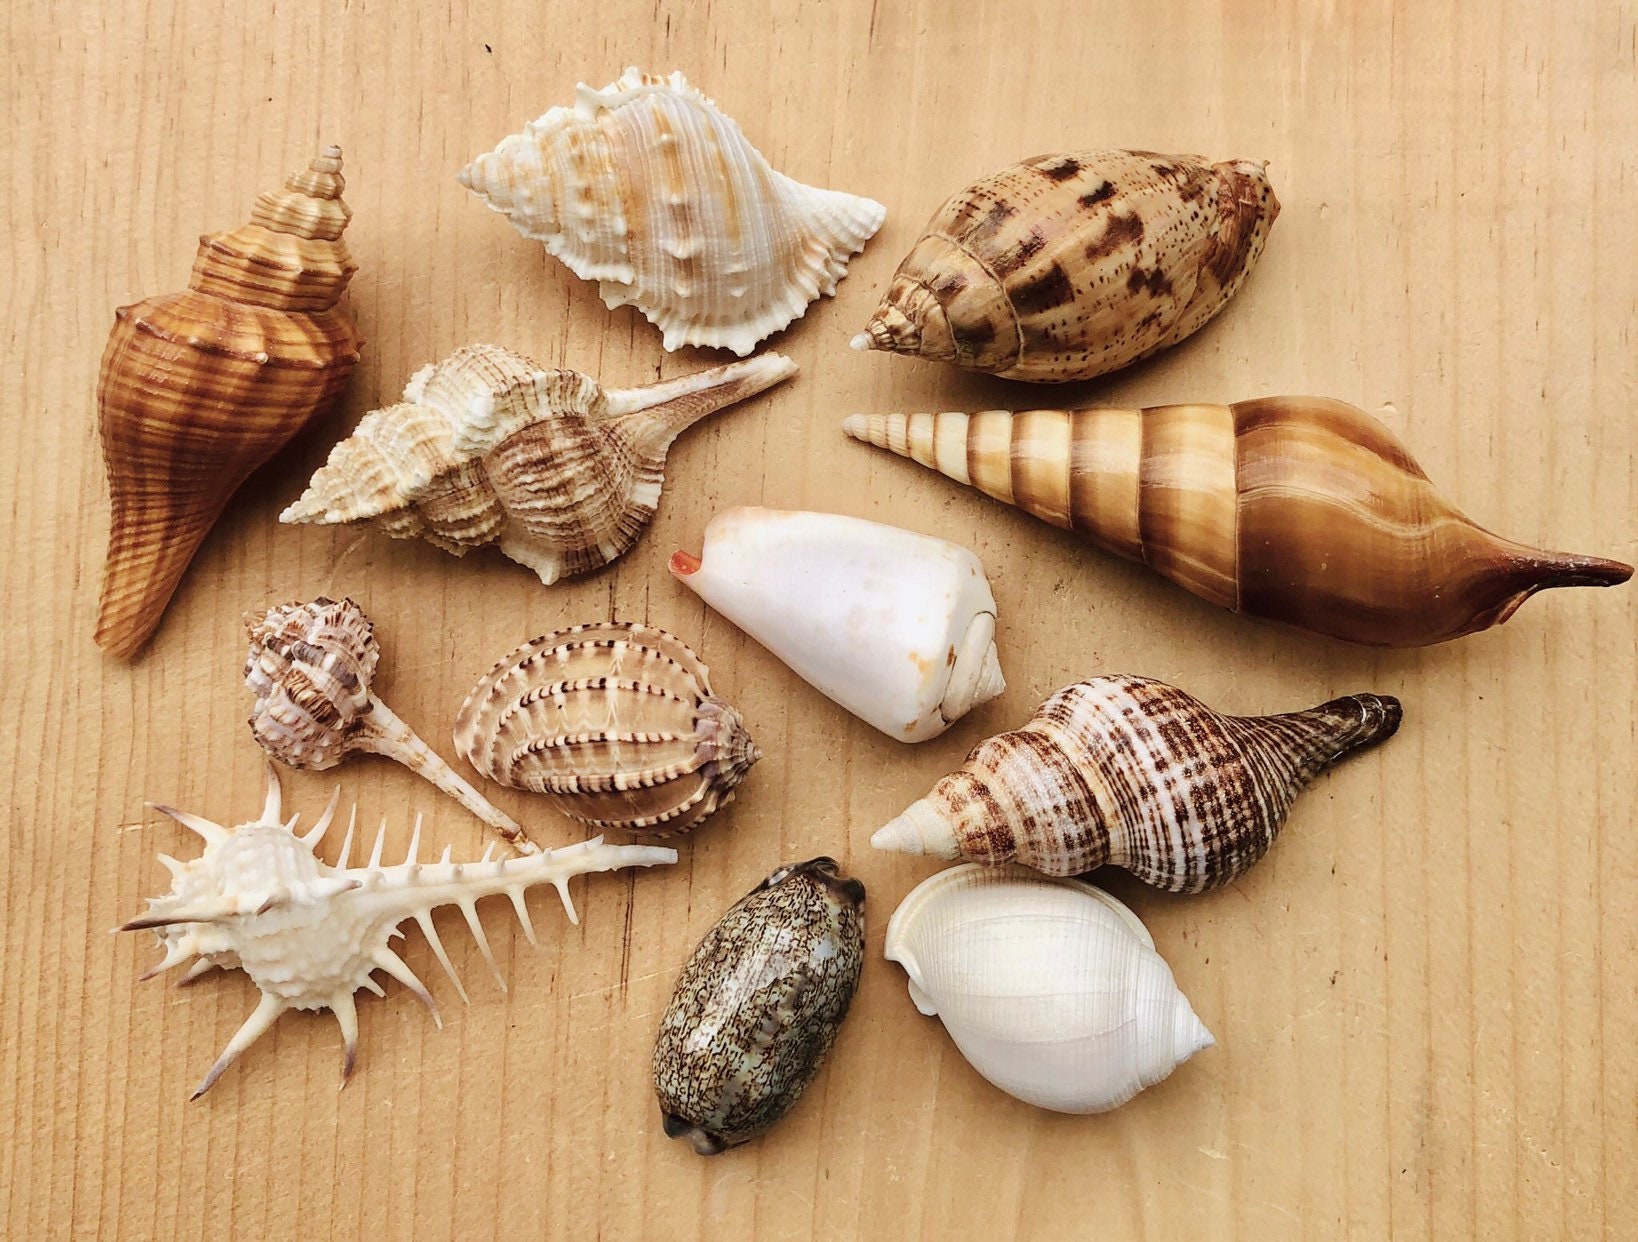 Sea Shells for Decorating Crafting Mixed Beach Natural Seashells for DIY  Crafts Home Mermaid Christmas Decorations Beach Theme Party Wedding Decor